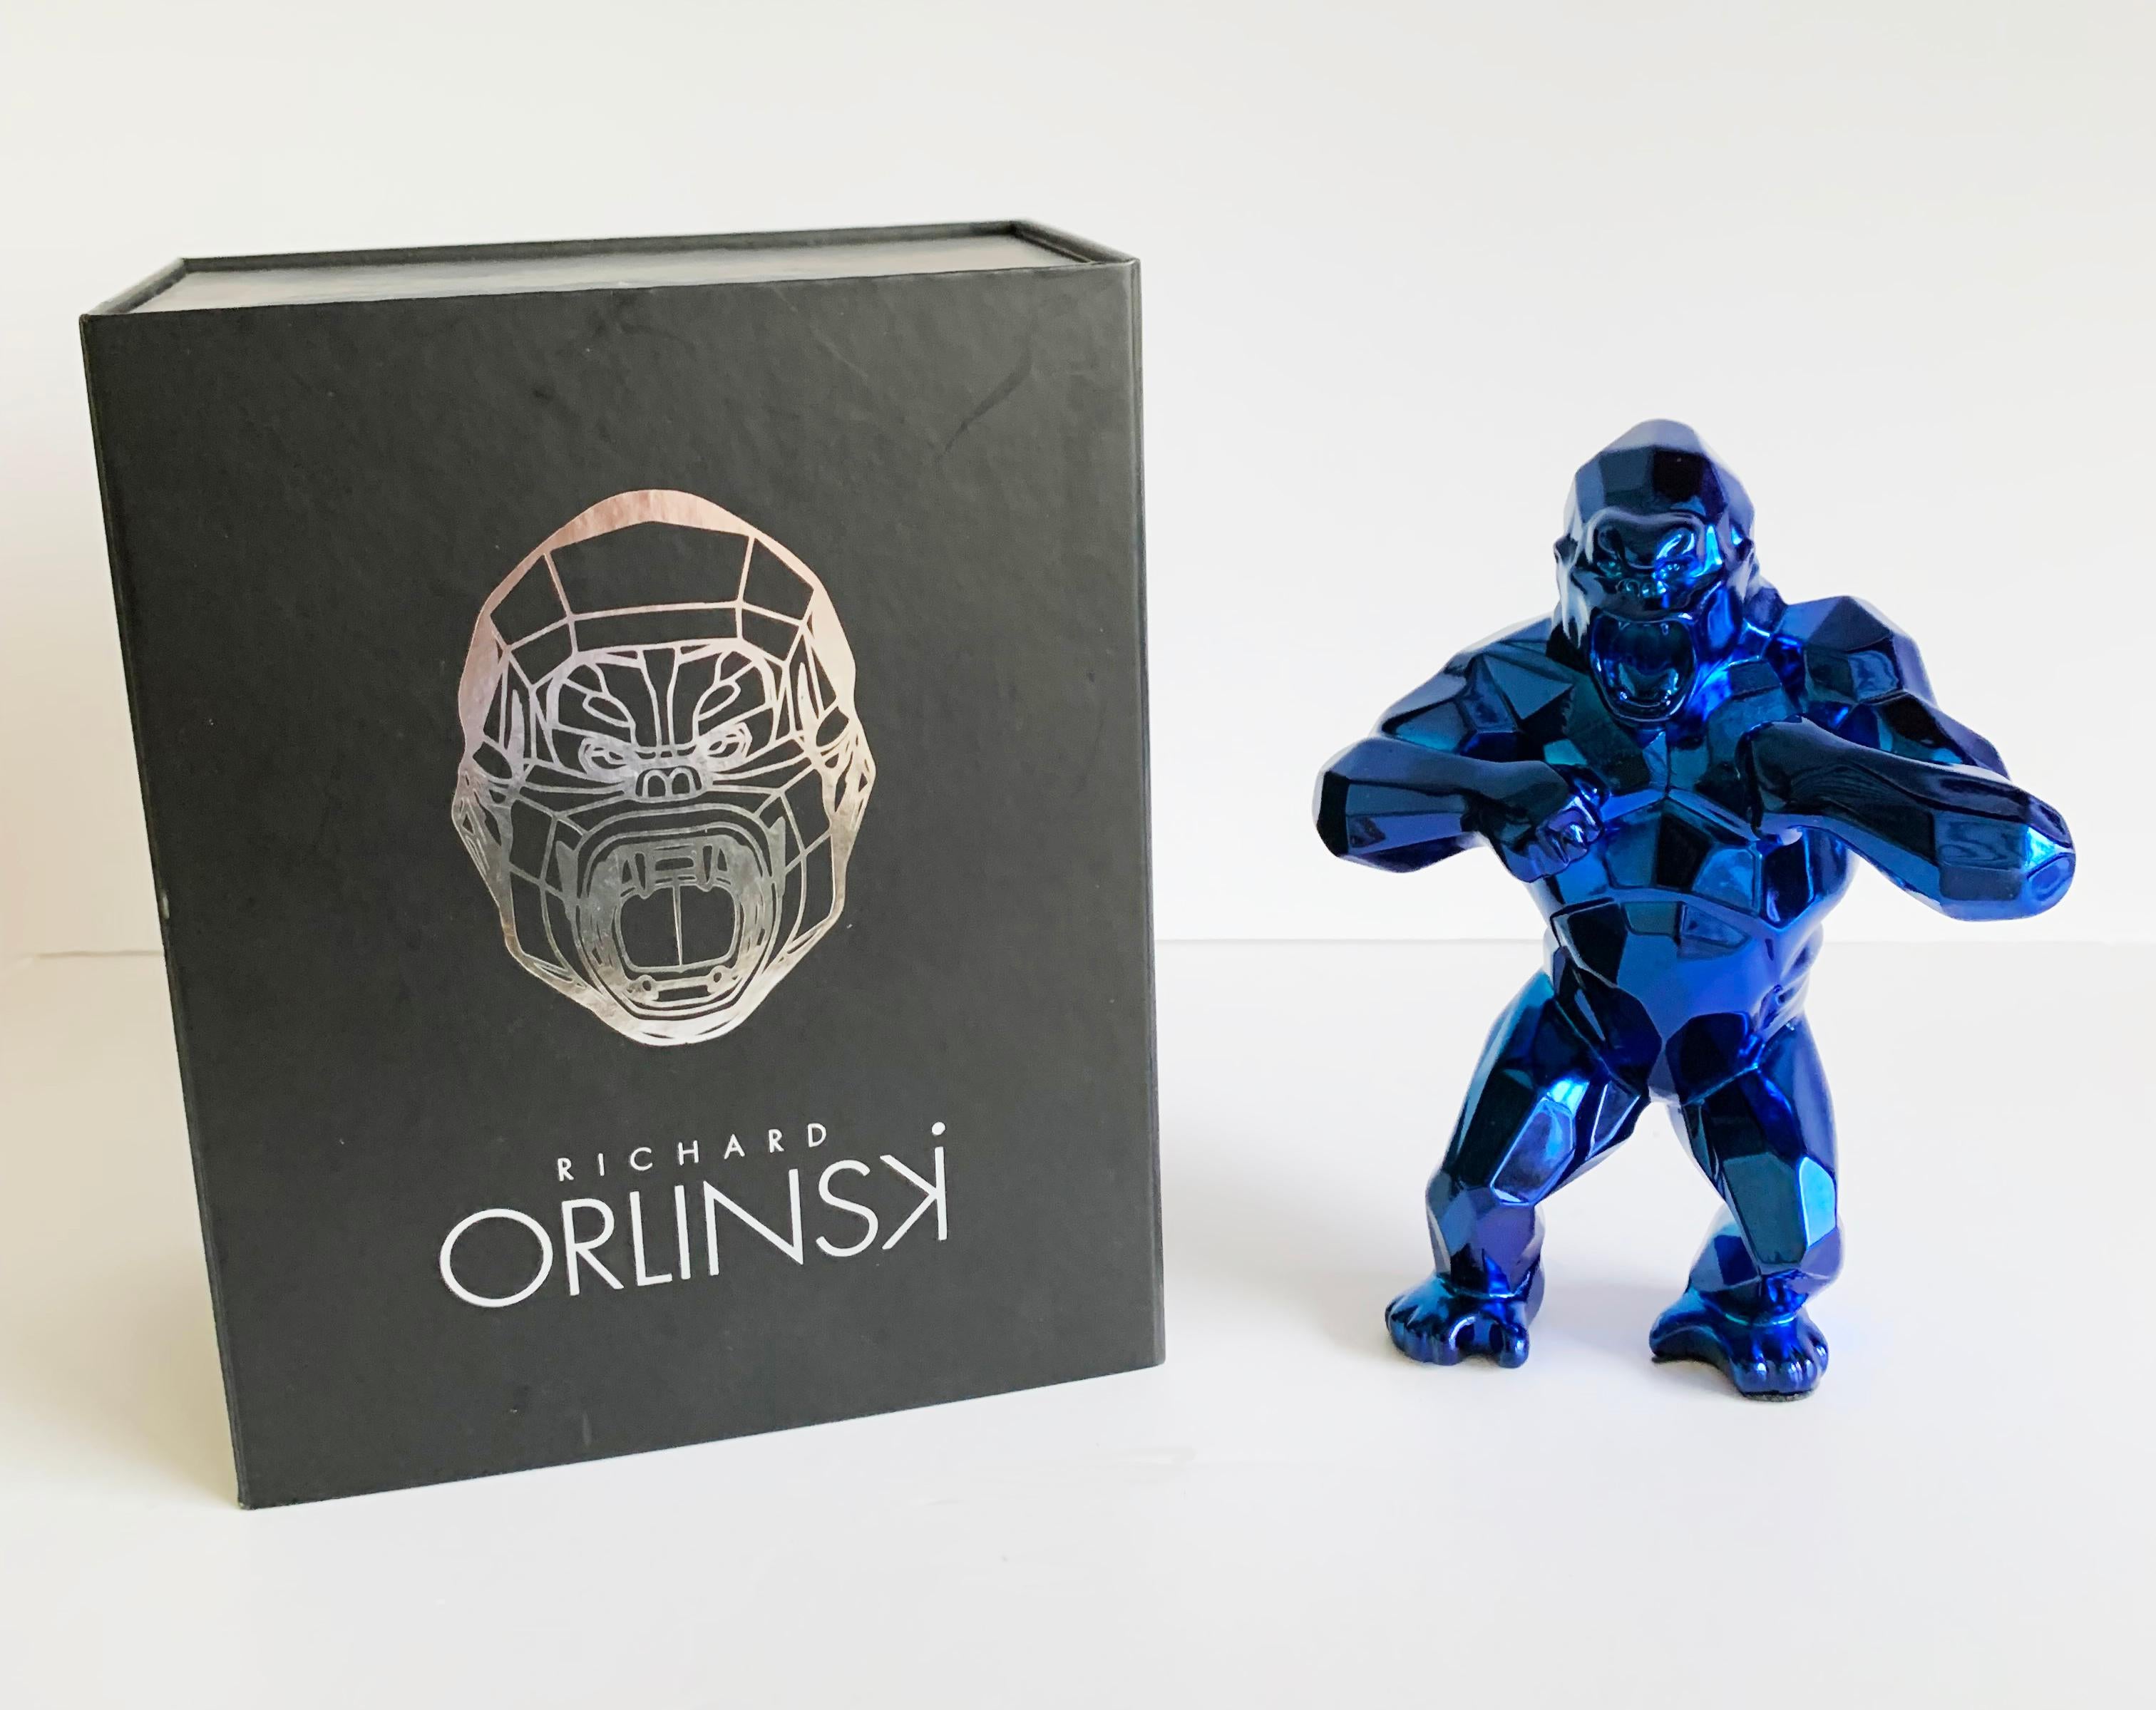 Kong Spirit sculpture - Richard Orlinski

In blue resin
With original box and certificate of authenticity
2019
Size : 13,5cm 

690€.